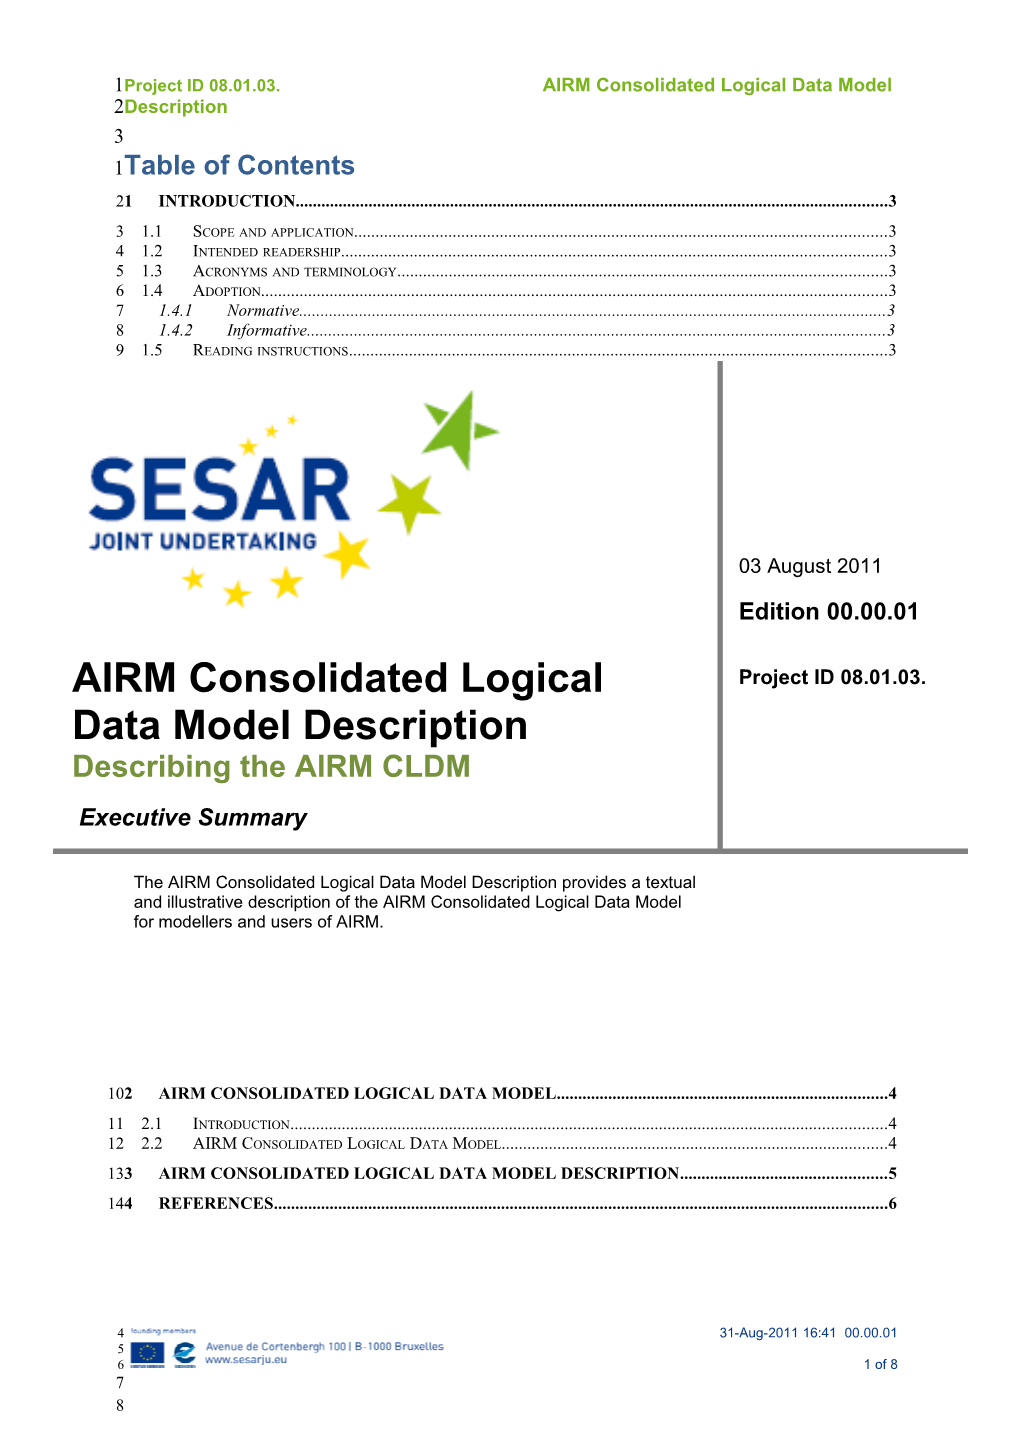 AIRM Consolidated Logical Data Model Description